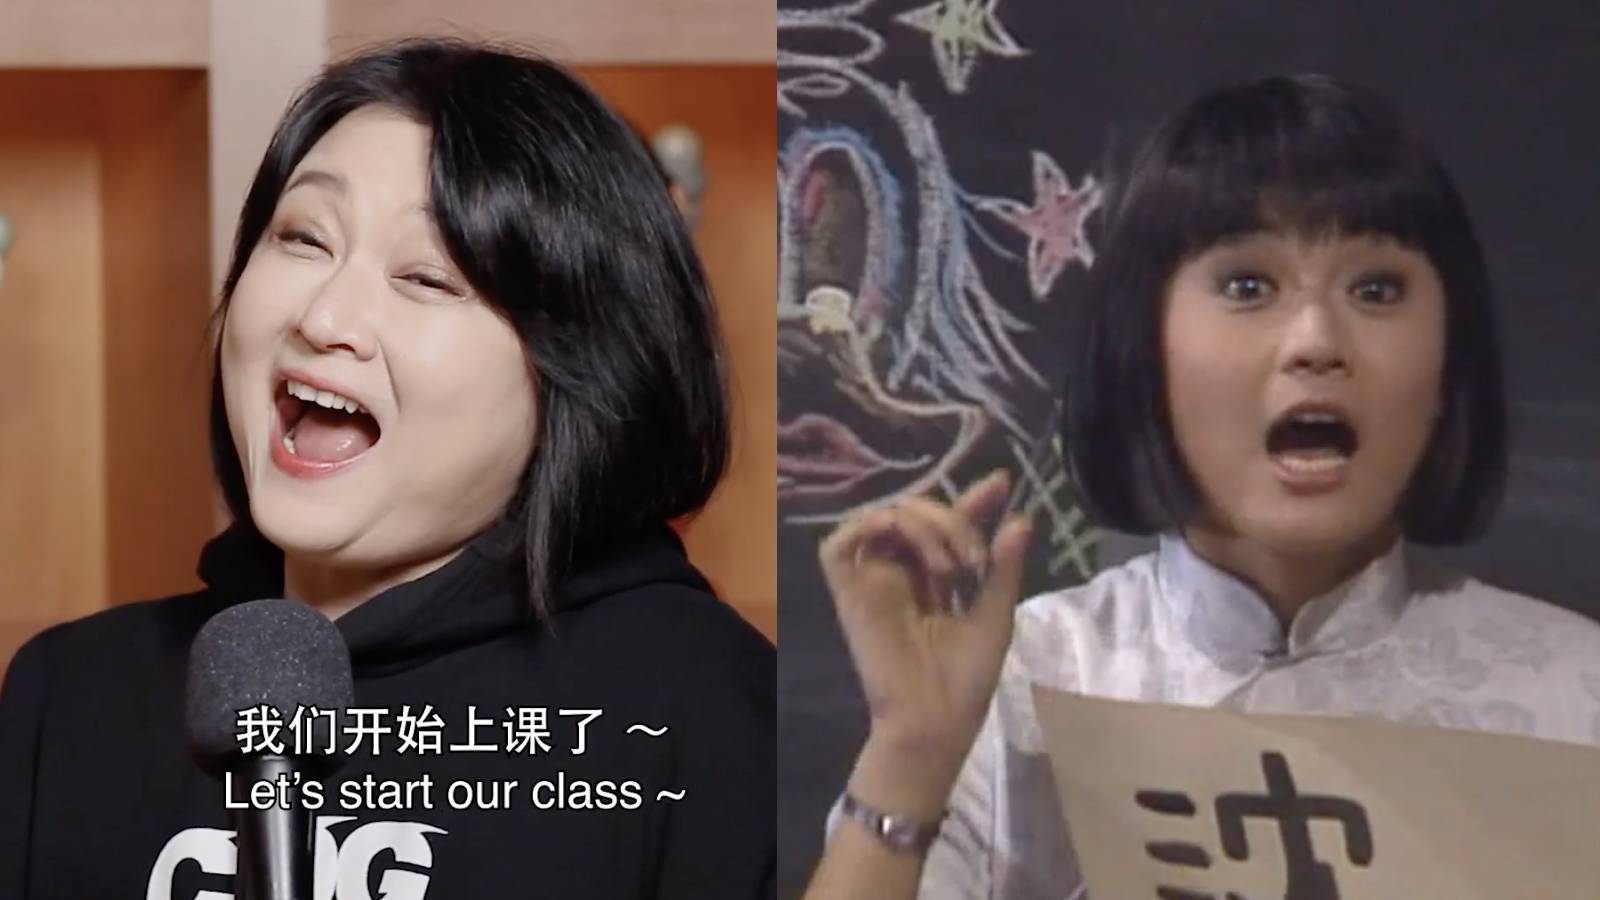 Chen Liping Reveals How Her Iconic ‘Aiyoyo' Catchphrase Came About